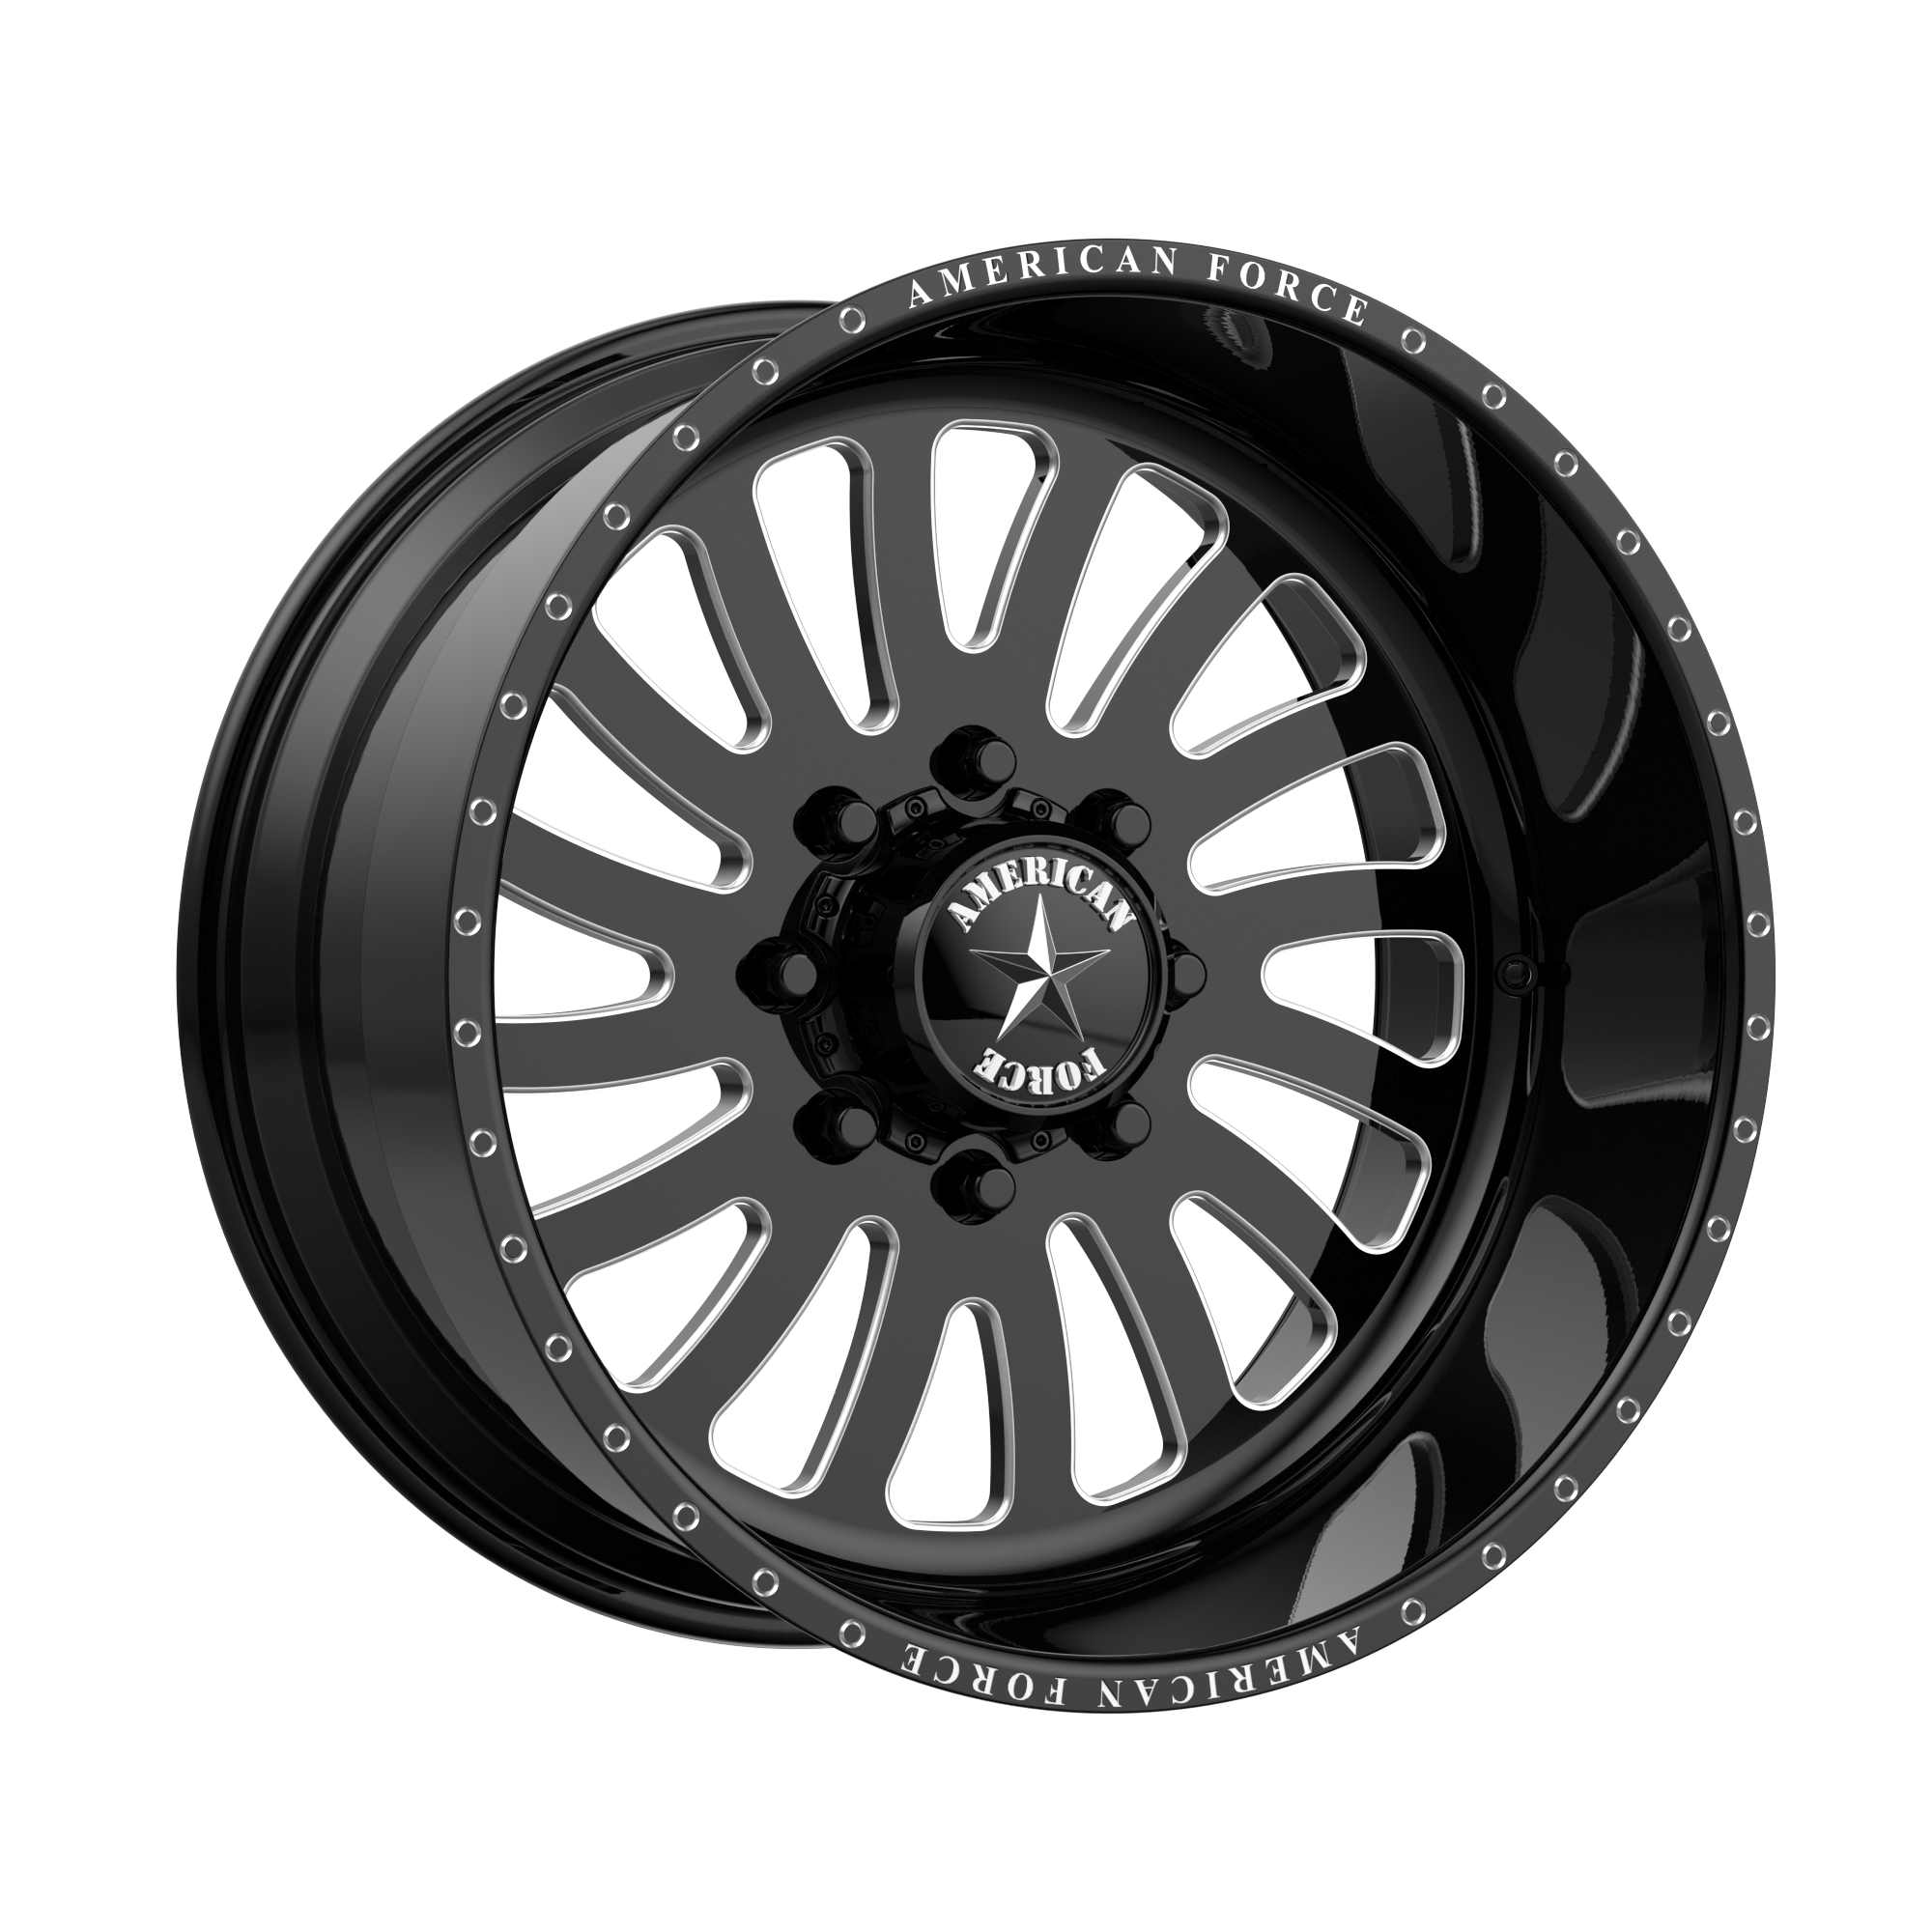 OCTANE SS 22x16 8x180.00 GLOSS BLACK MACHINED (-101 mm) - Tires and Engine Performance